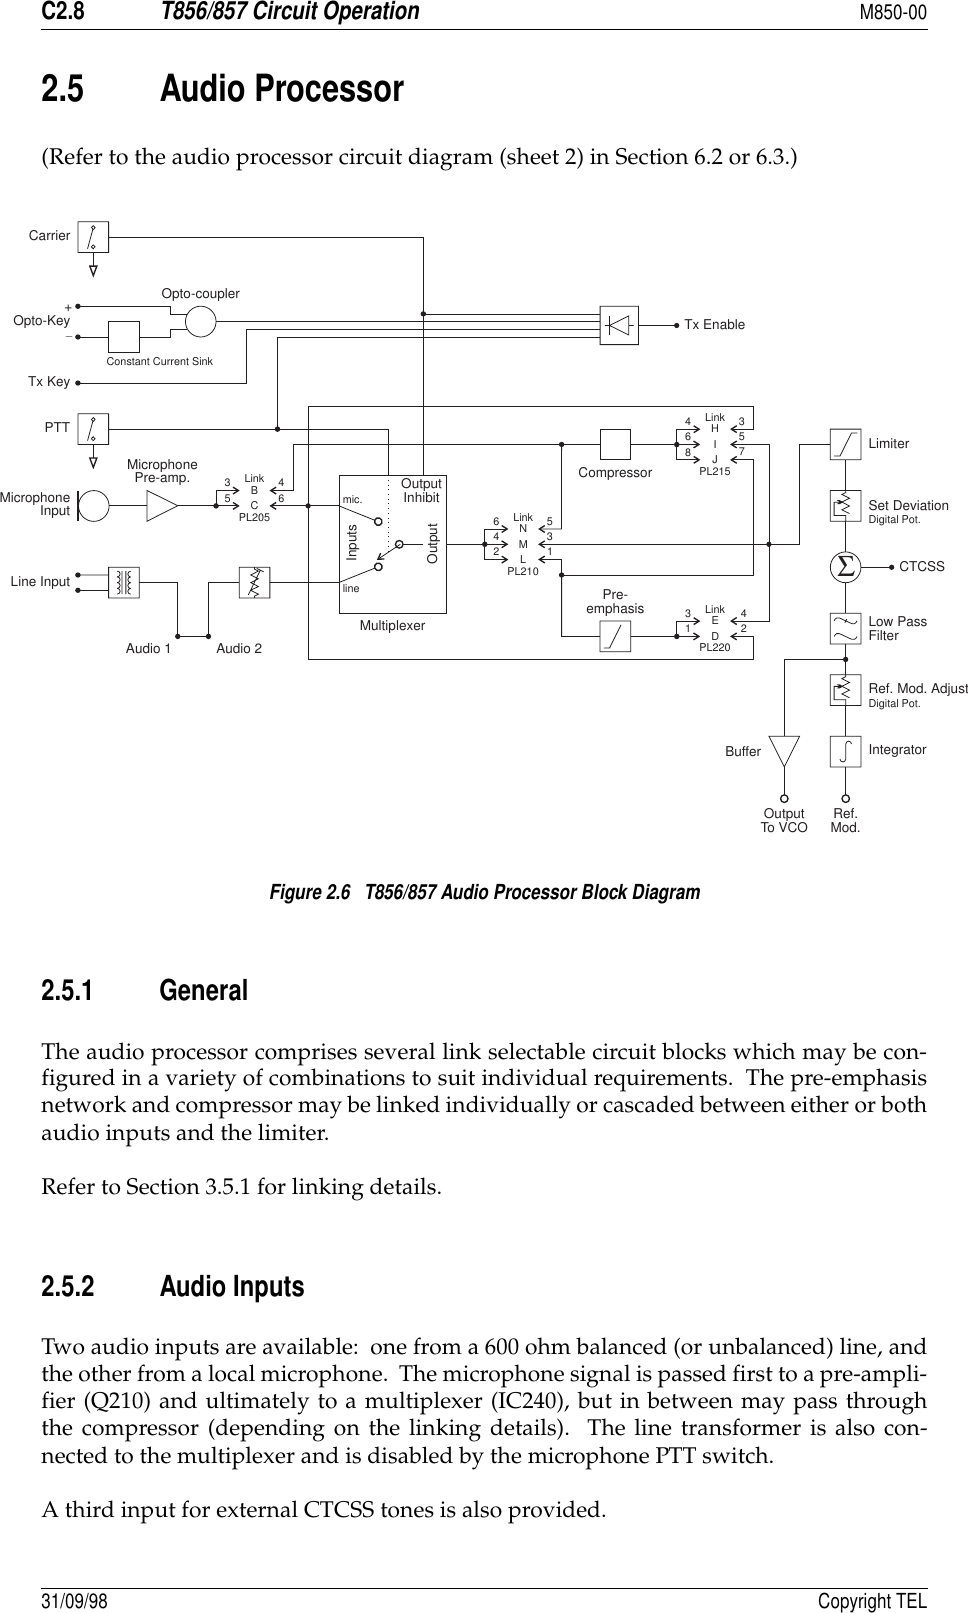 C2.8T856/857 Circuit OperationM850-0031/09/98 Copyright TEL2.5 Audio Processor(Refer to the audio processor circuit diagram (sheet 2) in Section 6.2 or 6.3.)Figure 2.6   T856/857 Audio Processor Block Diagram2.5.1 GeneralThe audio processor comprises several link selectable circuit blocks which may be con-figured in a variety of combinations to suit individual requirements.  The pre-emphasisnetwork and compressor may be linked individually or cascaded between either or bothaudio inputs and the limiter.Refer to Section 3.5.1 for linking details.2.5.2 Audio InputsTwo audio inputs are available:  one from a 600 ohm balanced (or unbalanced) line, andthe other from a local microphone.  The microphone signal is passed first to a pre-ampli-fier (Q210) and ultimately to a multiplexer (IC240), but in between may pass throughthe compressor (depending on the linking details).  The line transformer is also con-nected to the multiplexer and is disabled by the microphone PTT switch.A third input for external CTCSS tones is also provided.Pre-emphasis346BC56434253357128NHMIELJD461mic.lineMultiplexerInputsOutputOutputInhibitAudio 1 Audio 2CompressorLinkLinkLinkTx EnableΣCarrierOpto-KeyTx KeyPTTMicrophoneInputLine InputMicrophonePre-amp.Opto-couplerLinkPL205PL215PL220PL210LimiterSet DeviationCTCSSLow PassFilterRef. Mod. AdjustIntegratorDigital Pot.Digital Pot.BufferOutputTo VCO Ref.Mod.Constant Current Sink+_